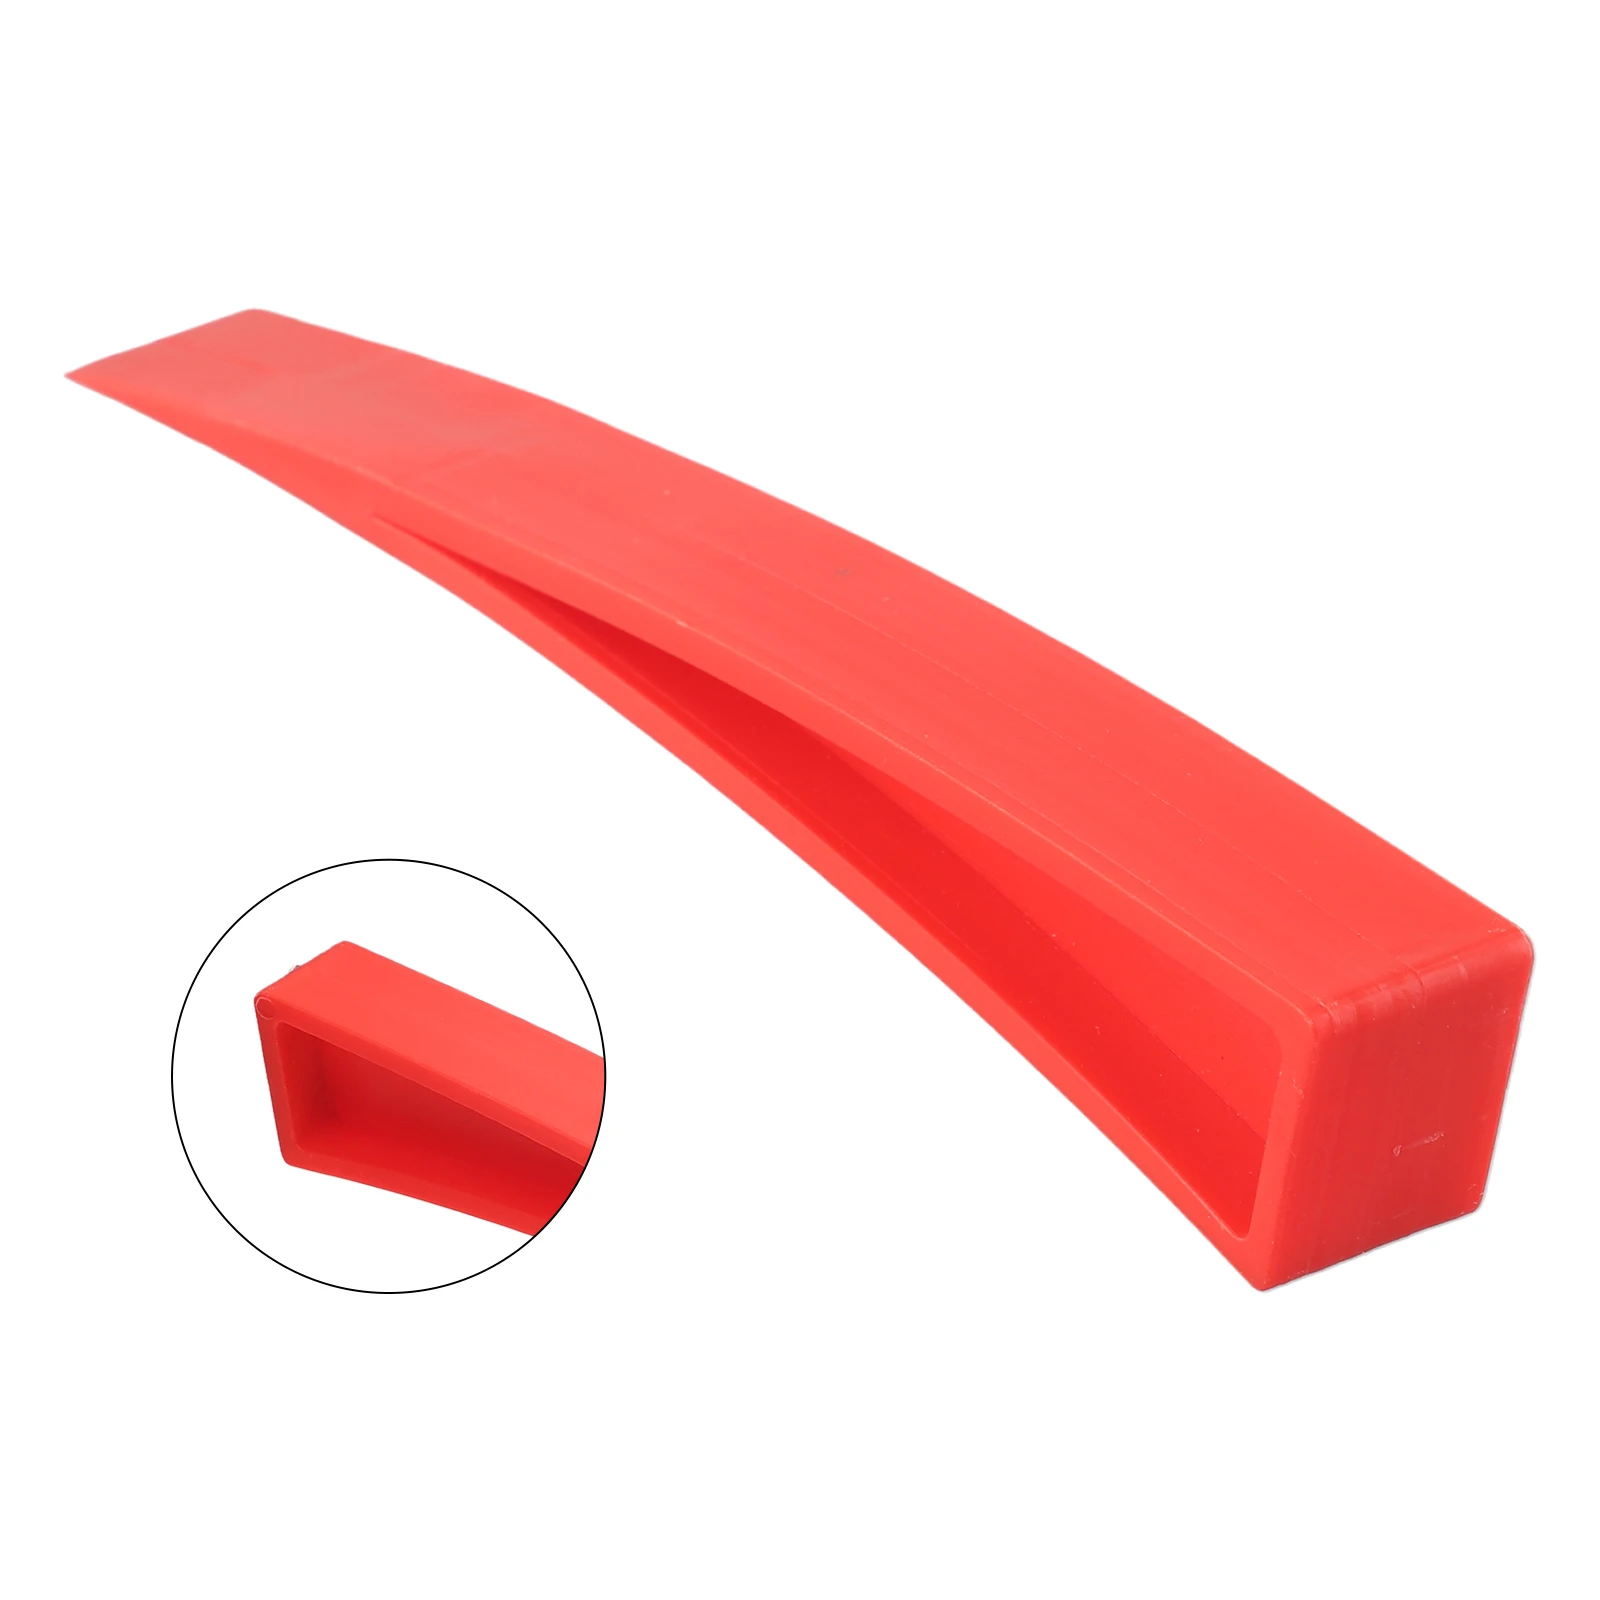 Red Auto/Car Door For Window Wedge Panel Paintless Dent Removal Repair Hand Tool Plastic-Accessories For Vehicles 1pc car dent repair support tool plastic car door wedge tool supporting clip auto door and window scratch removal tool